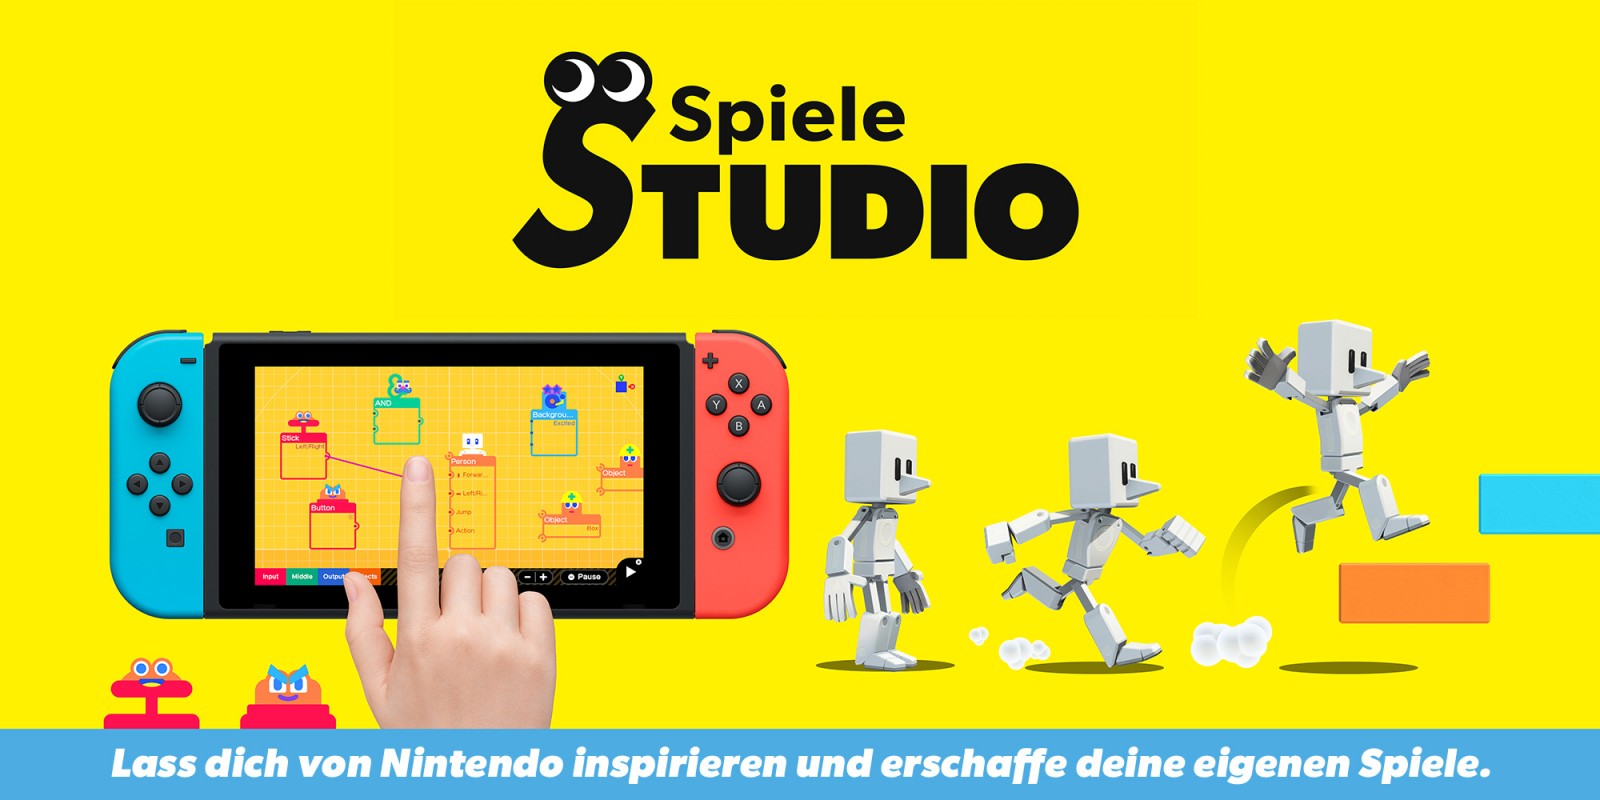 Sprint with the B button - download the new Game Studio mechanism • Nintendo Connect